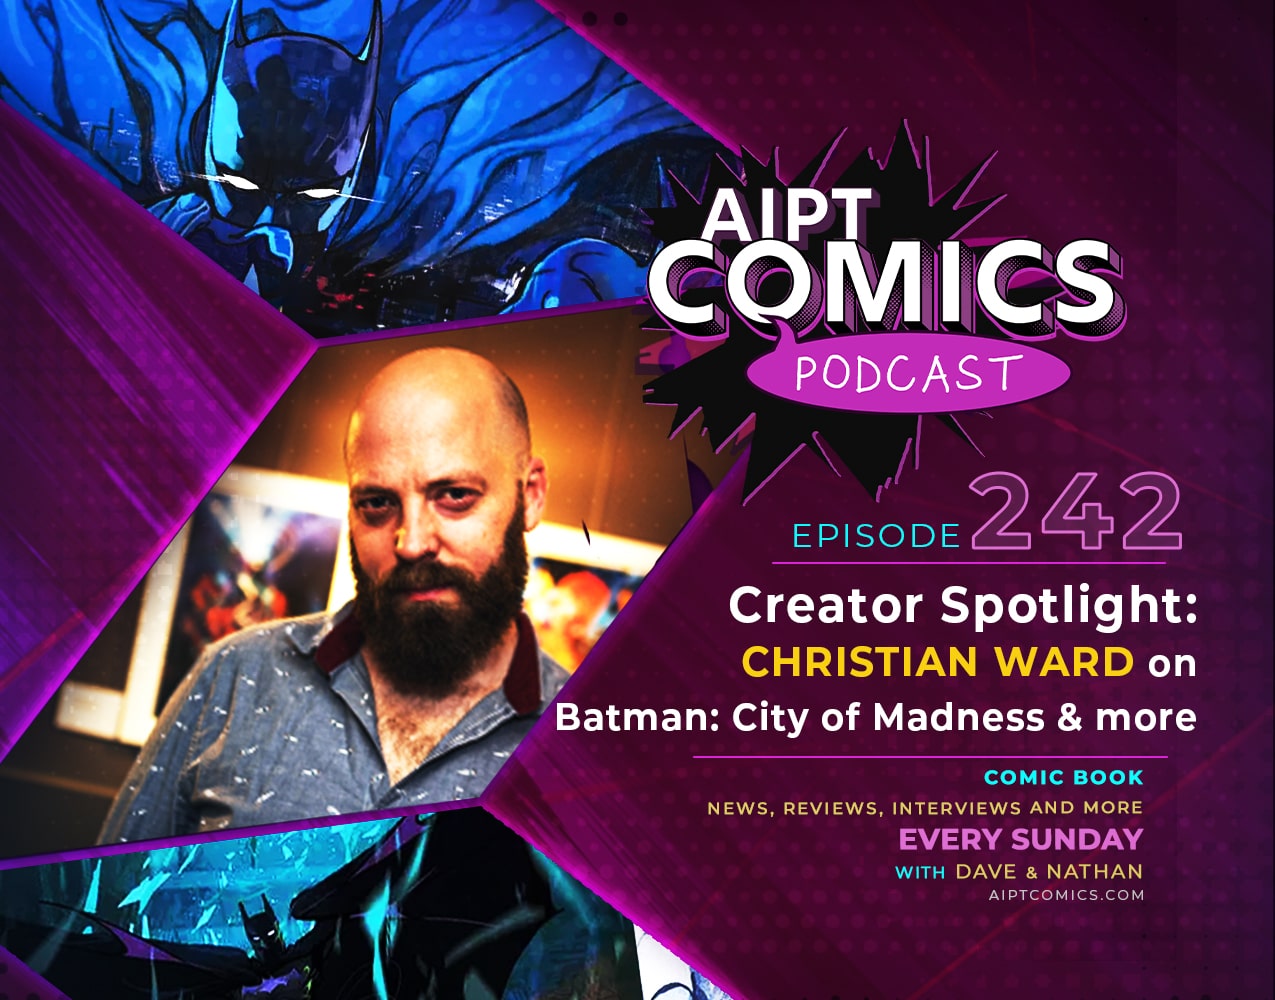 AIPT Comics Podcast Episode 242: Creator spotlight: Christian Ward on Batman: City of Madness and more